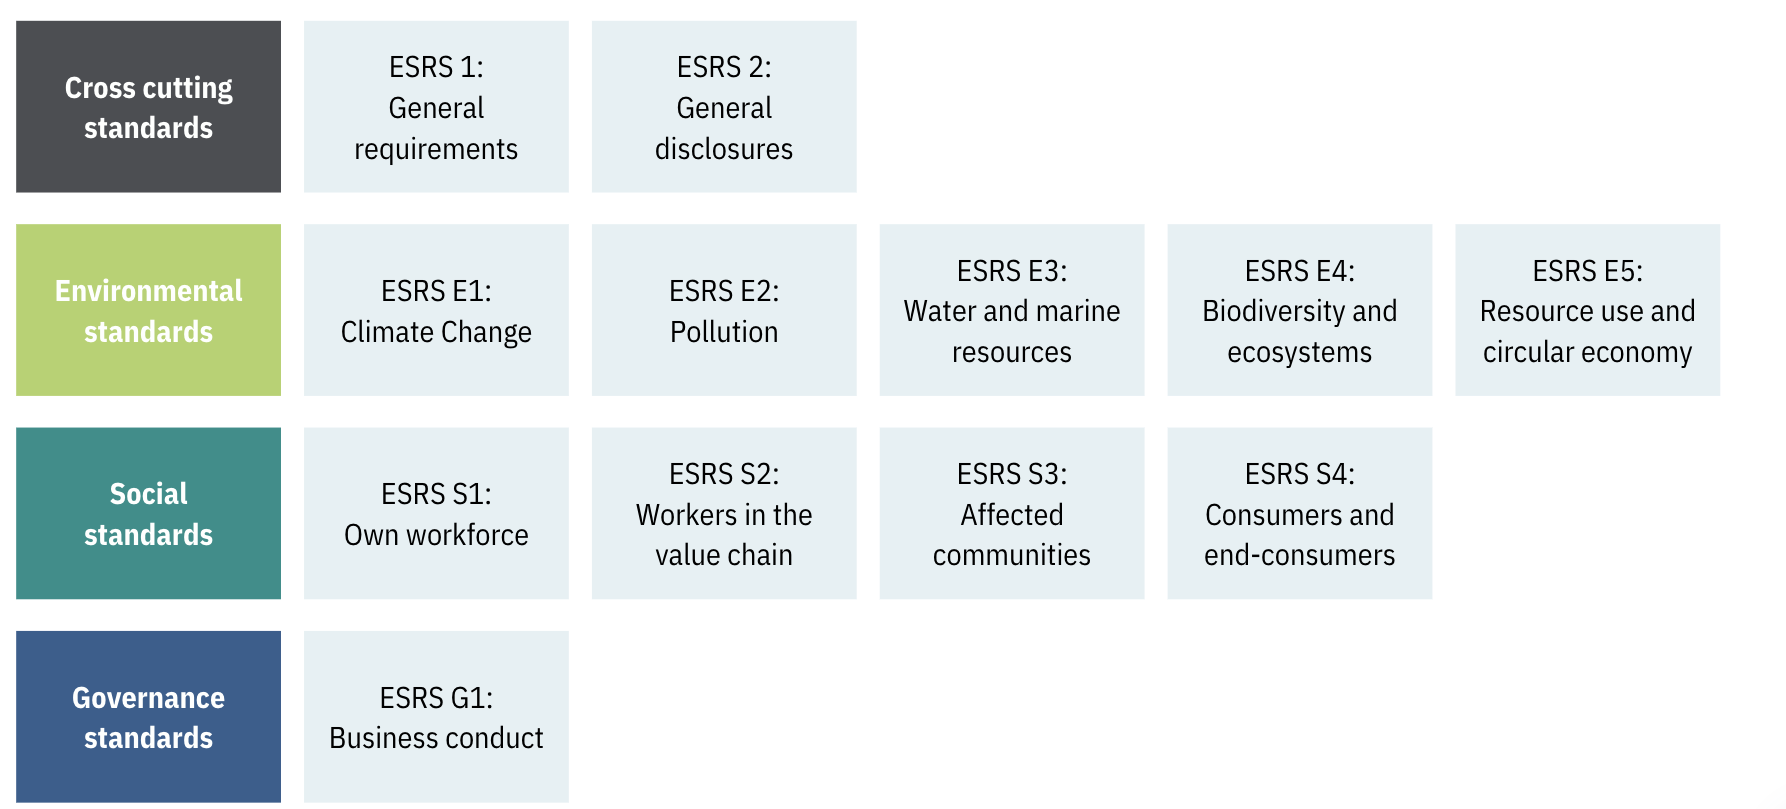 Figure 1: The European Sustainability Reporting Standards (ESRS)